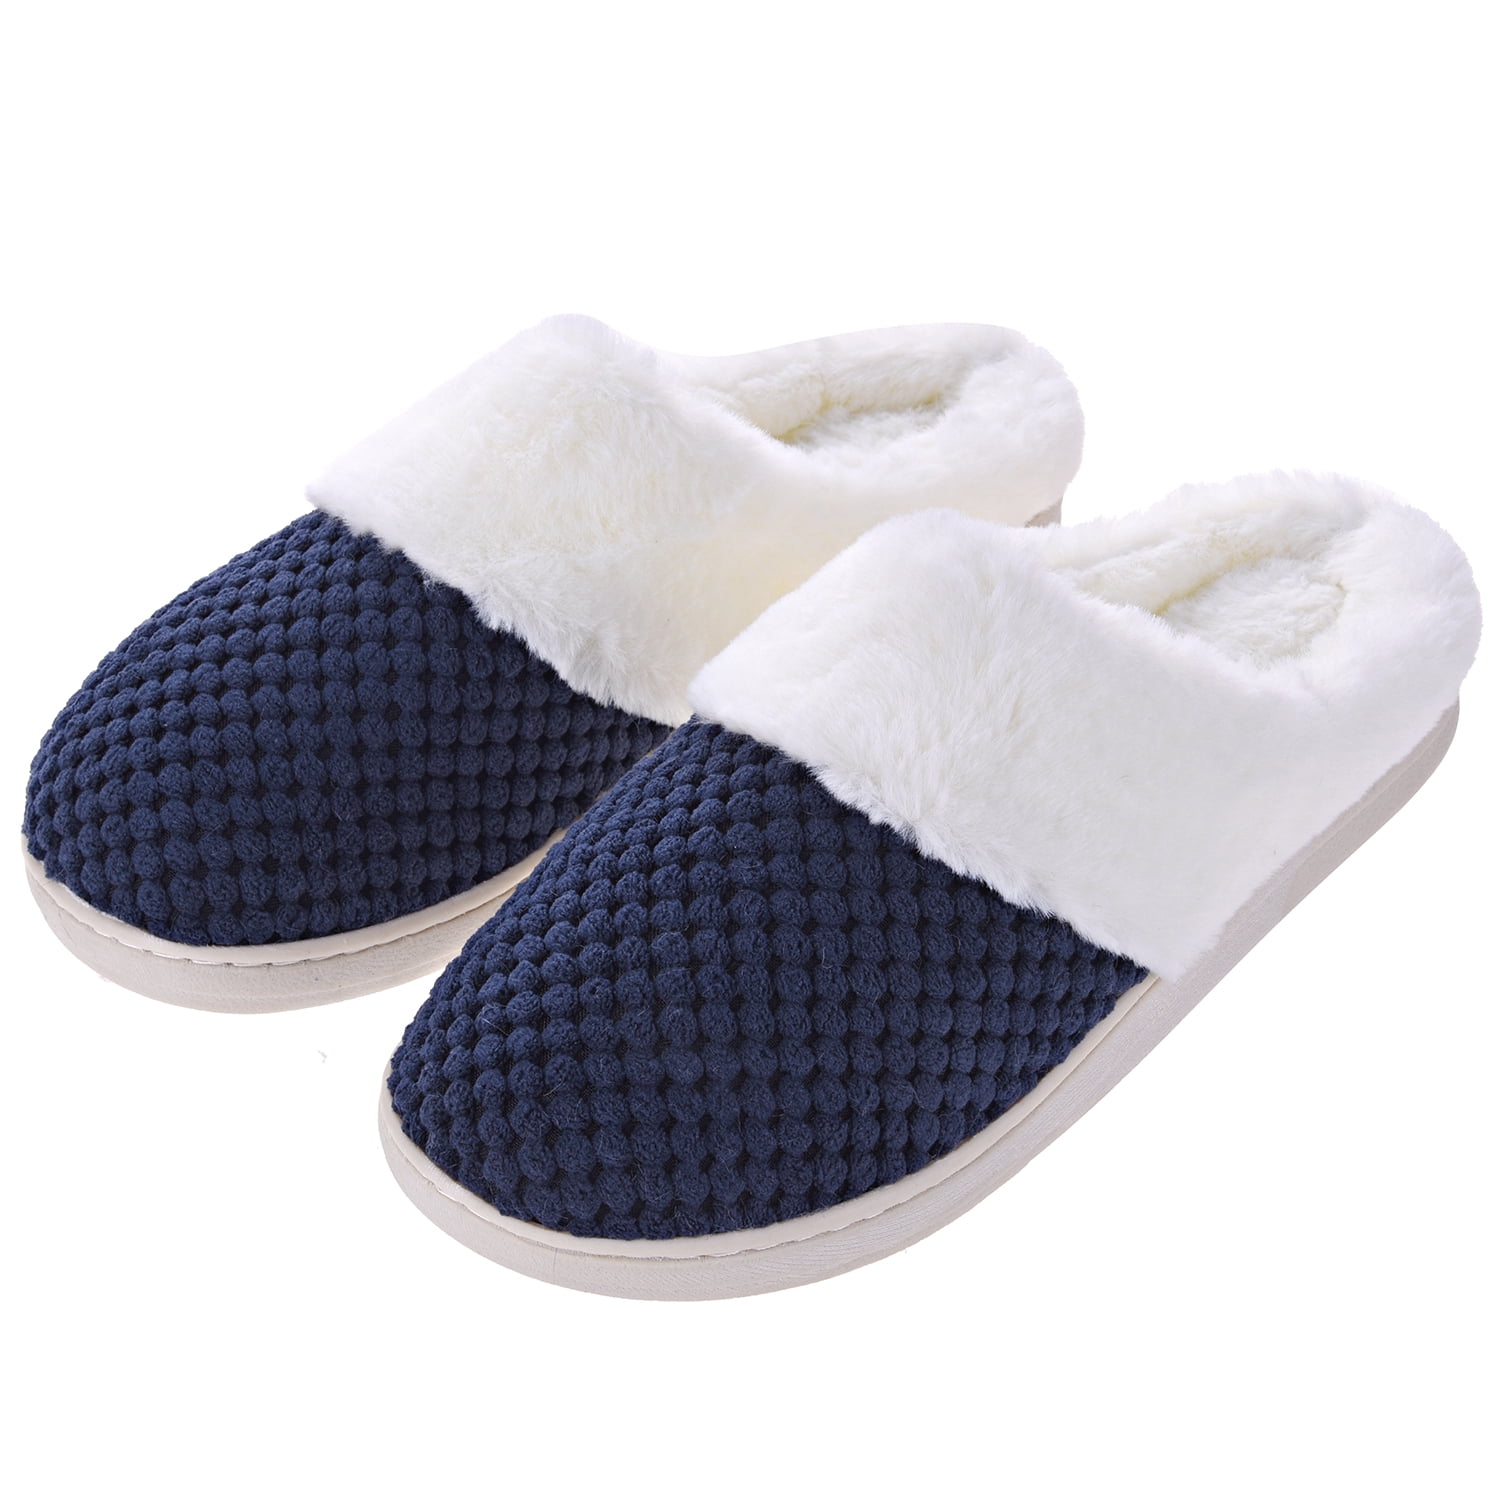 Vonmay - VONMAY Women's Slippers House Shoes Fleece Fuzzy Plush Lining ...